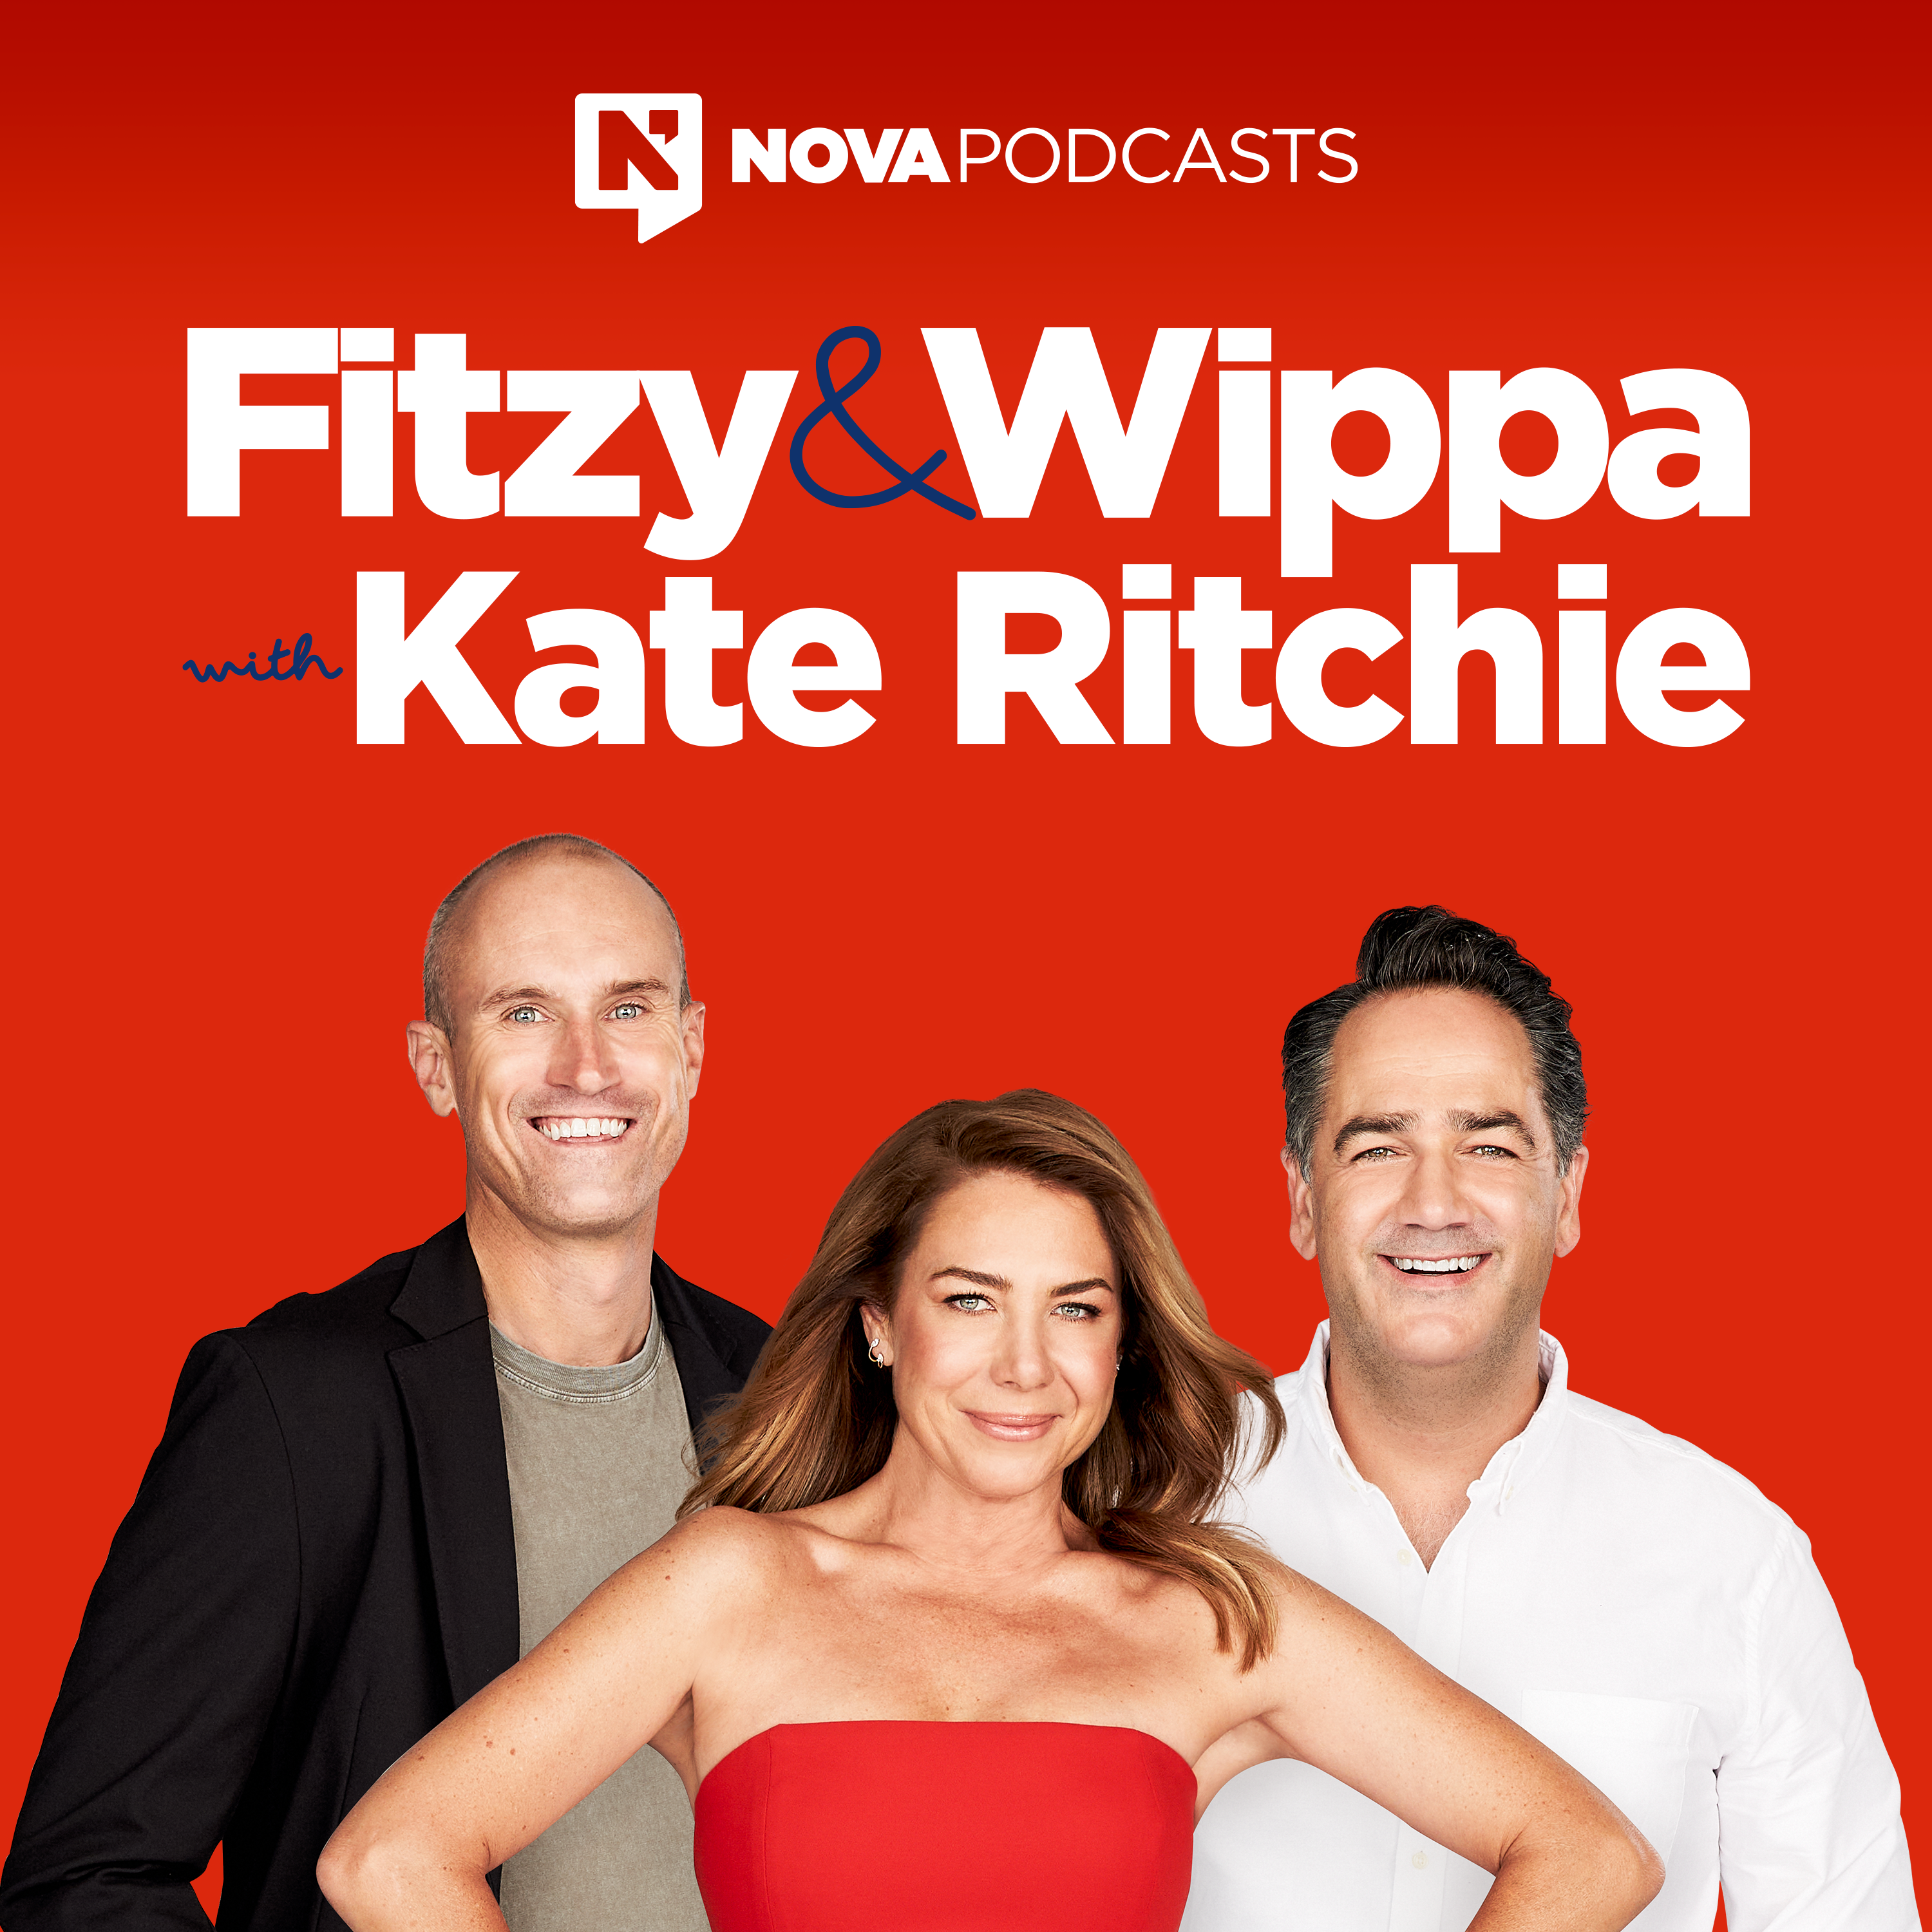 Beau Ryan, What you found in your wall, Wippa Rap King - 22nd June 2017